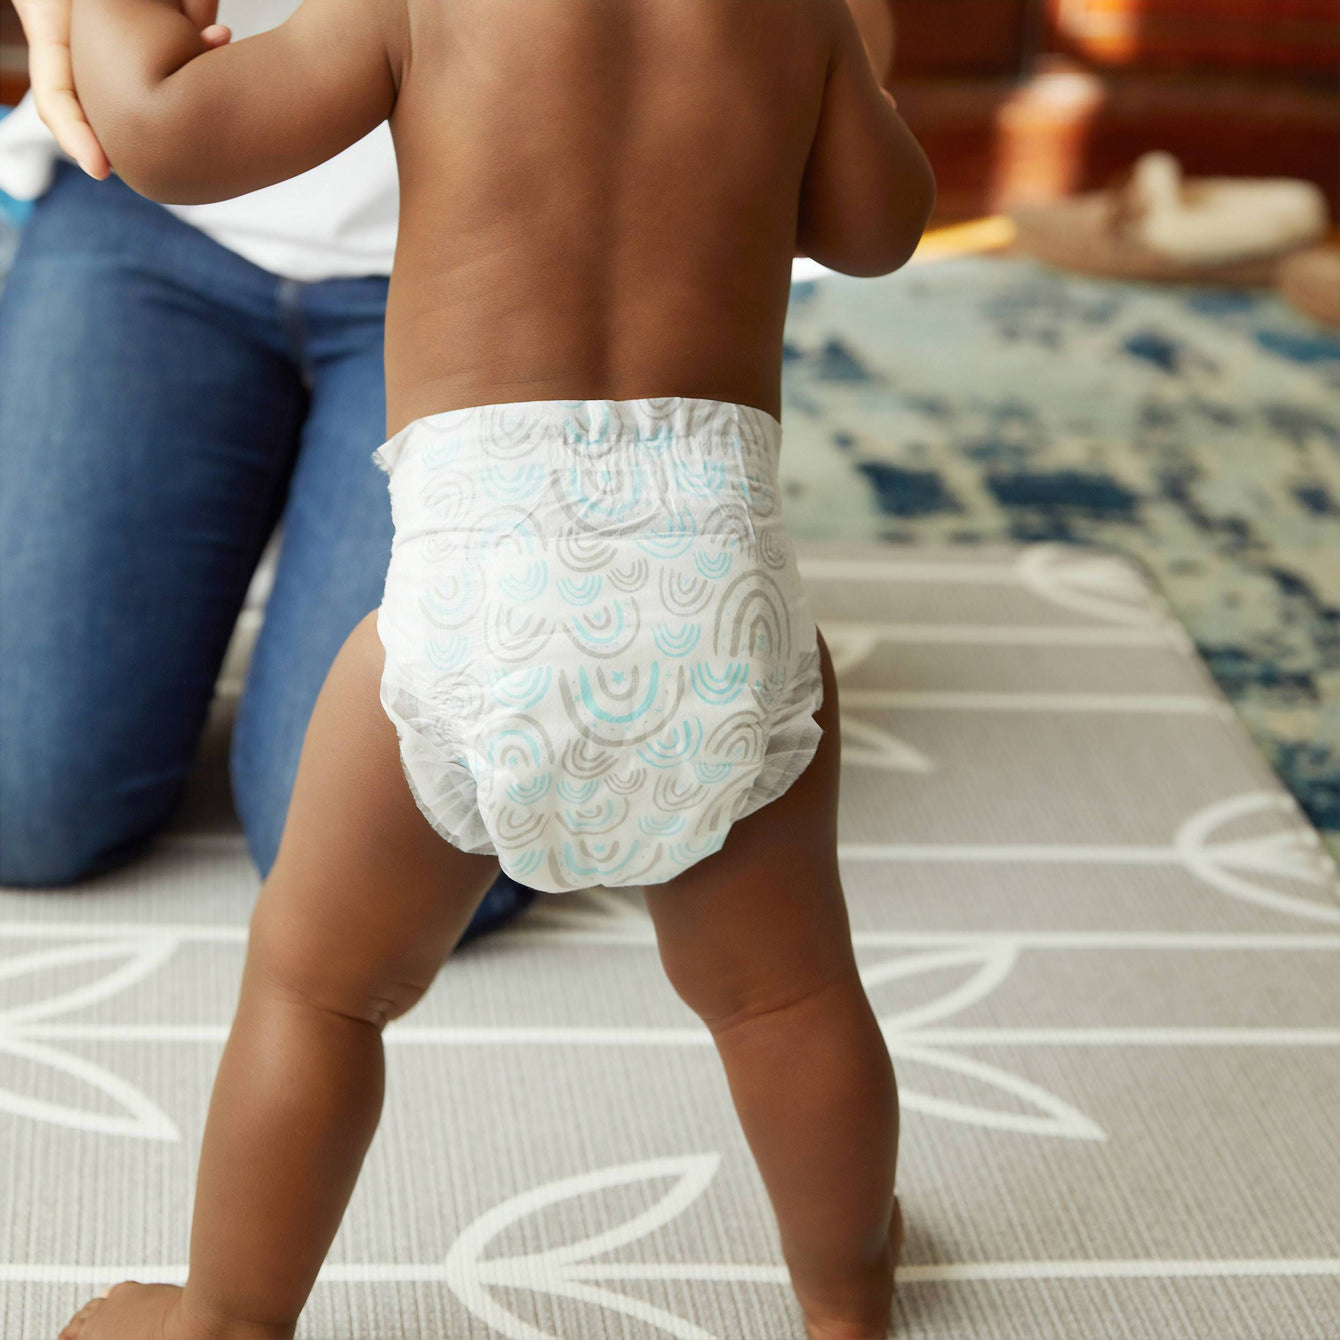 11 top tips for potty training